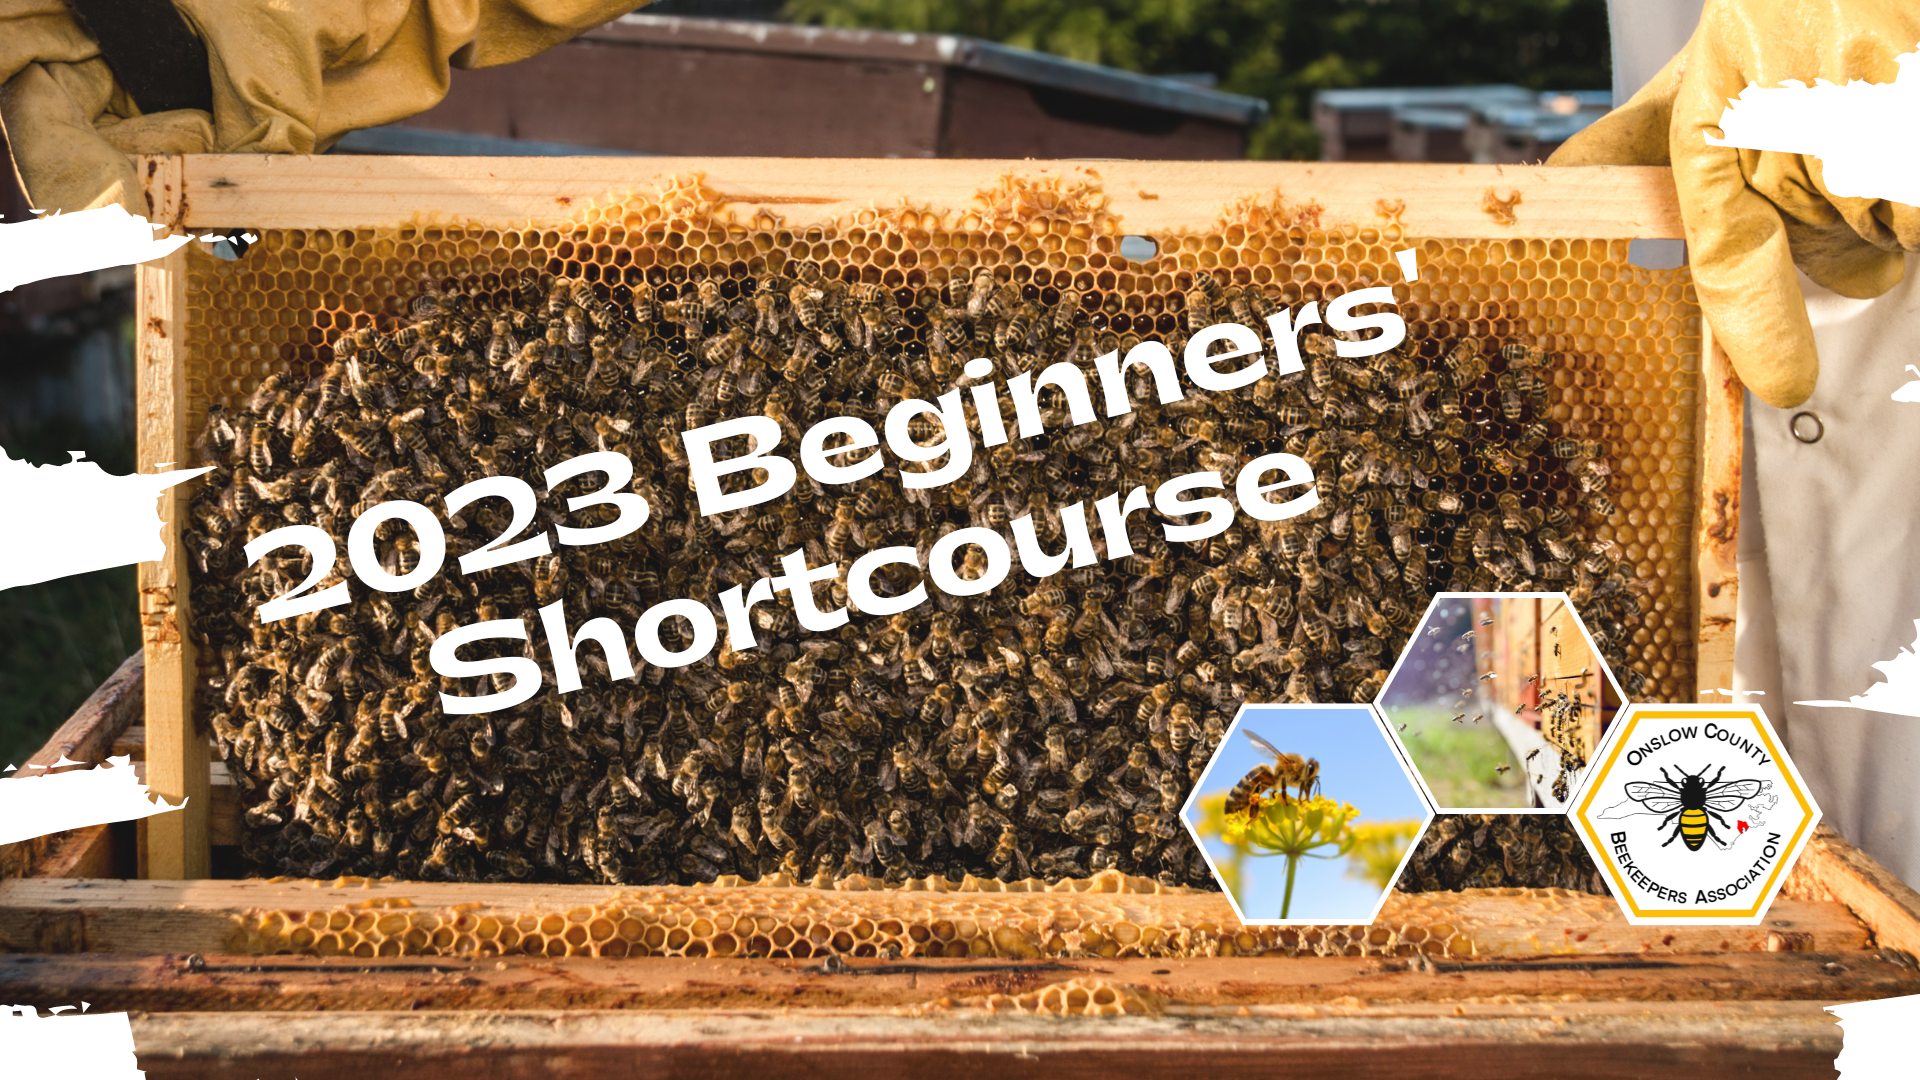 Onslow County Beekeepers 2023 Beginners Short Course graphic